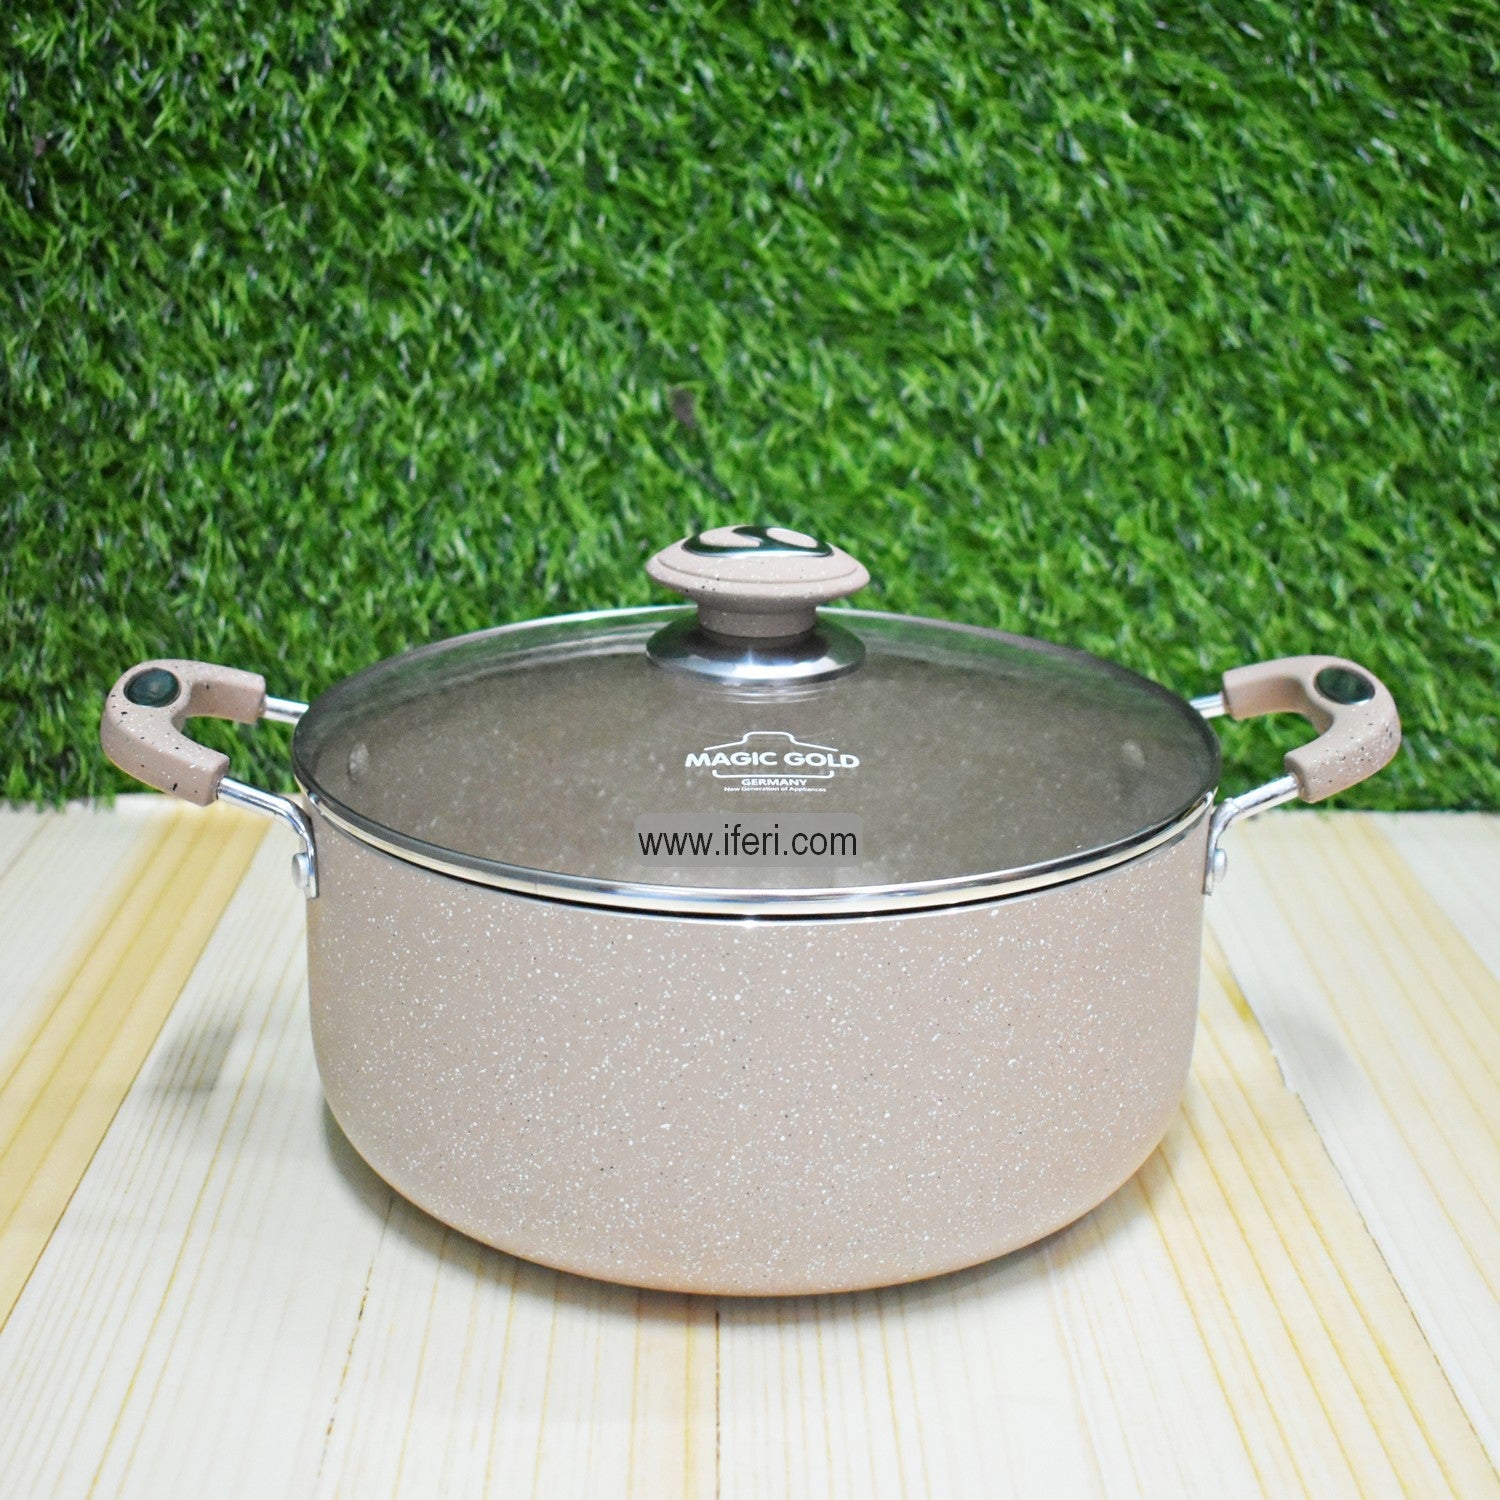 28 cm Magic Gold Non-stick Cookware with Lid TG00094